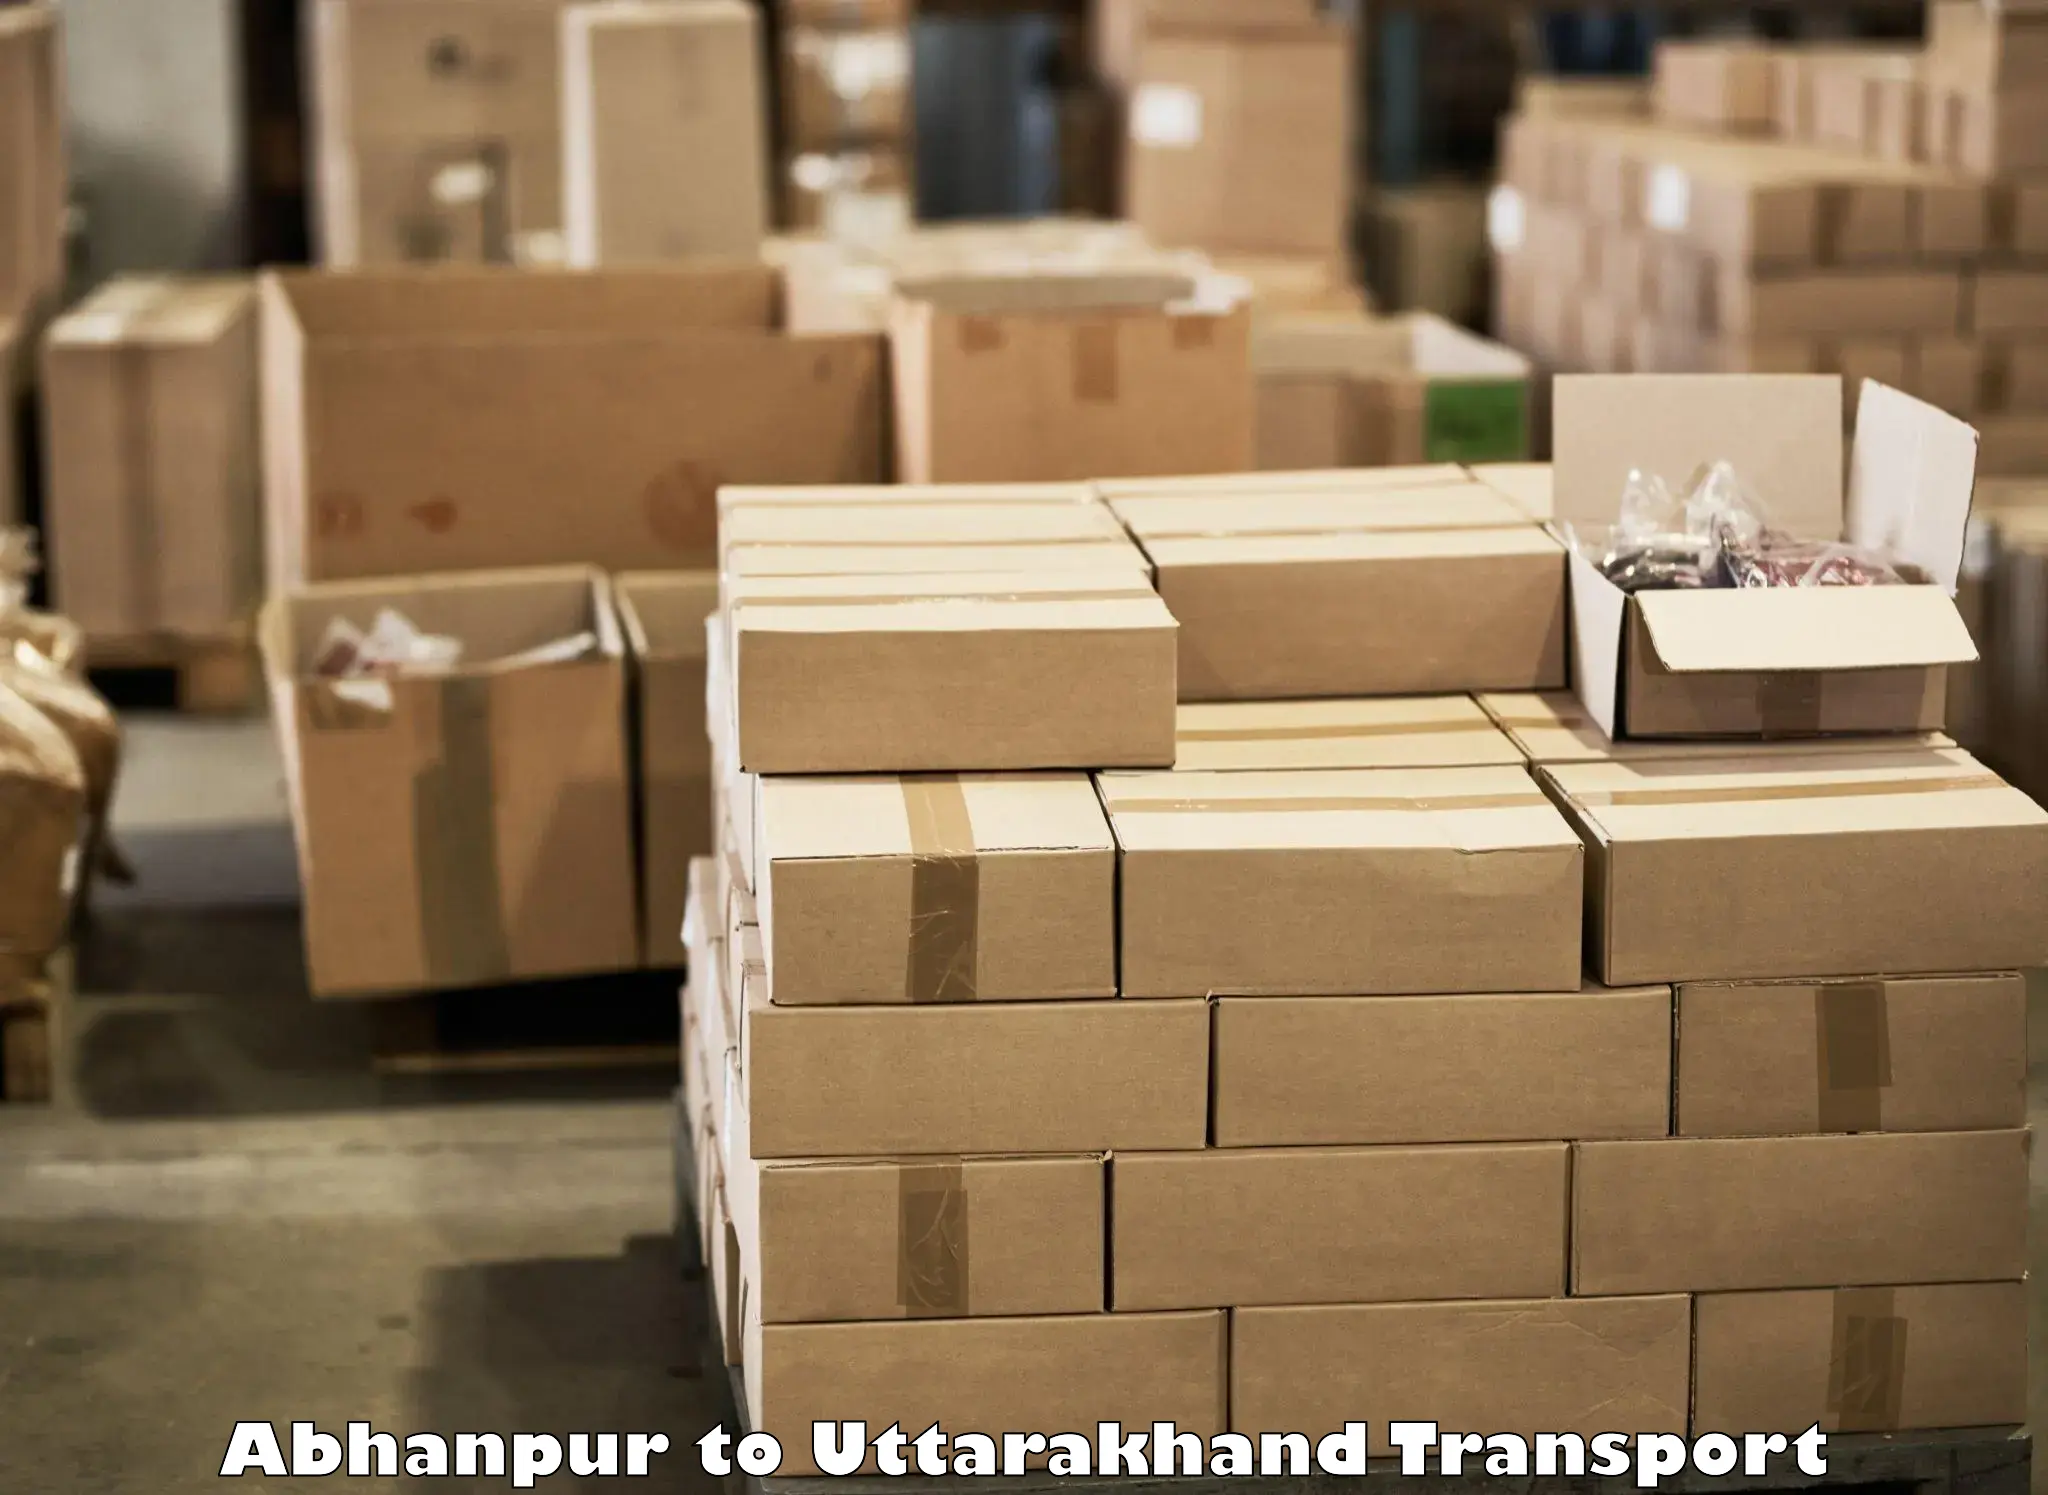 Container transport service in Abhanpur to Haridwar